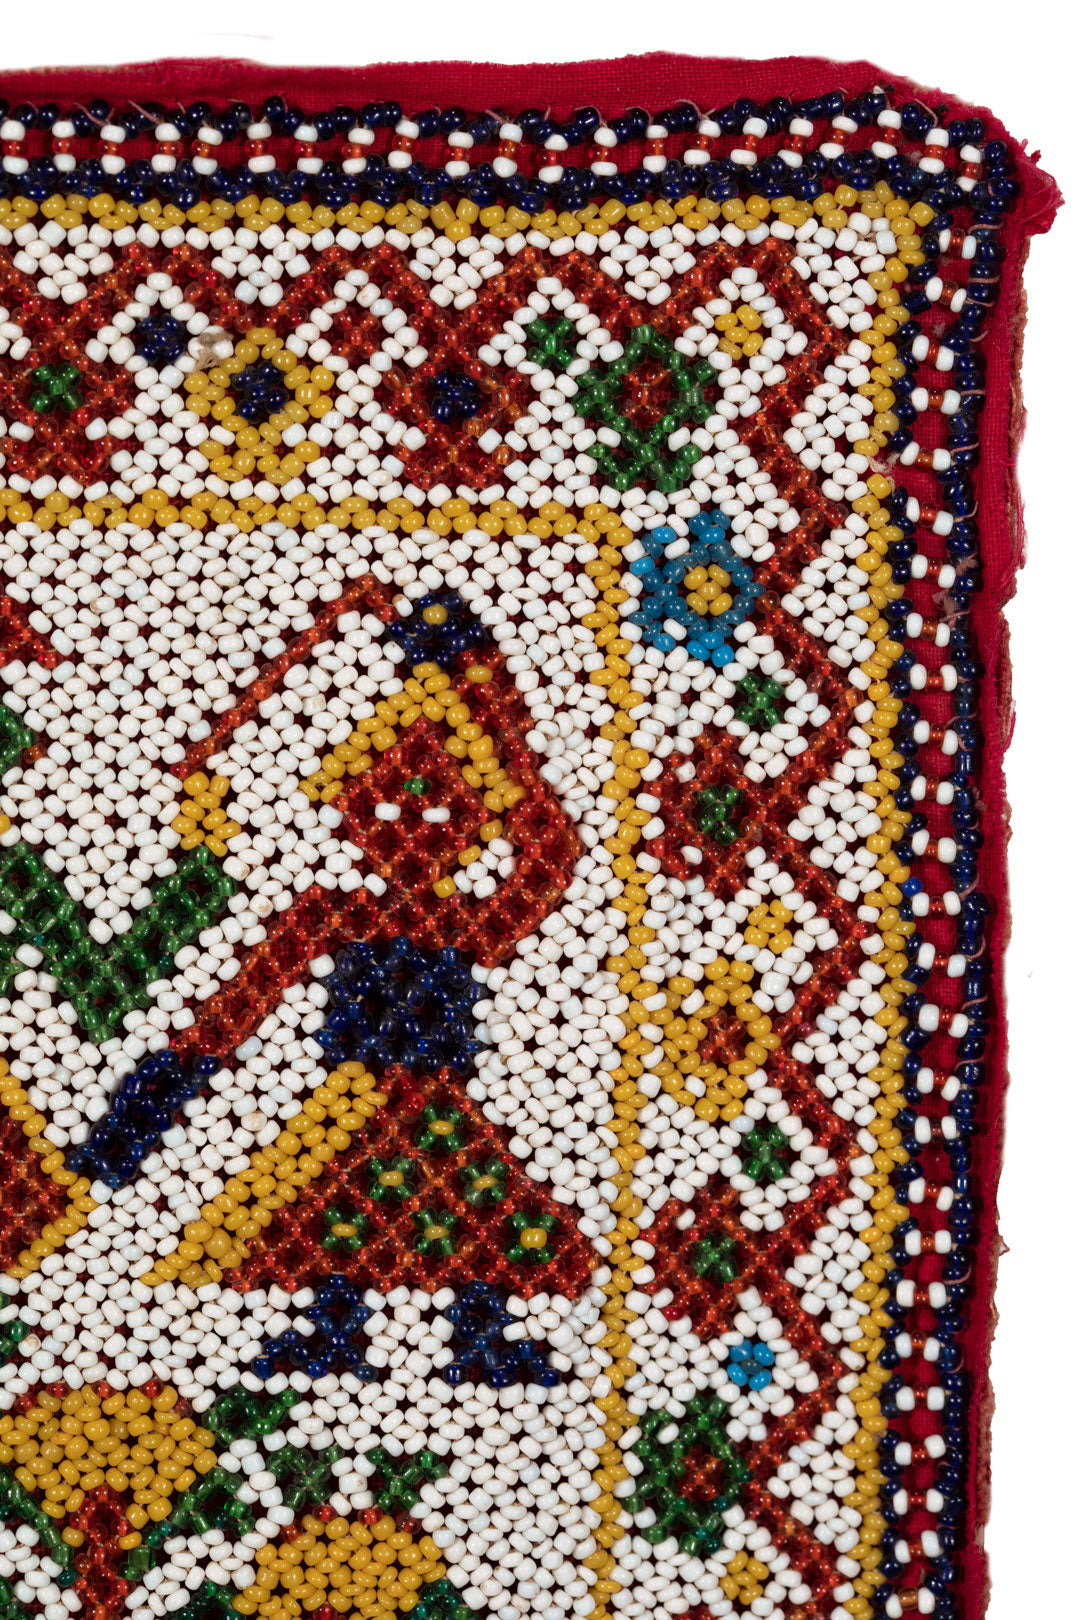 Beaded Pictorial Square